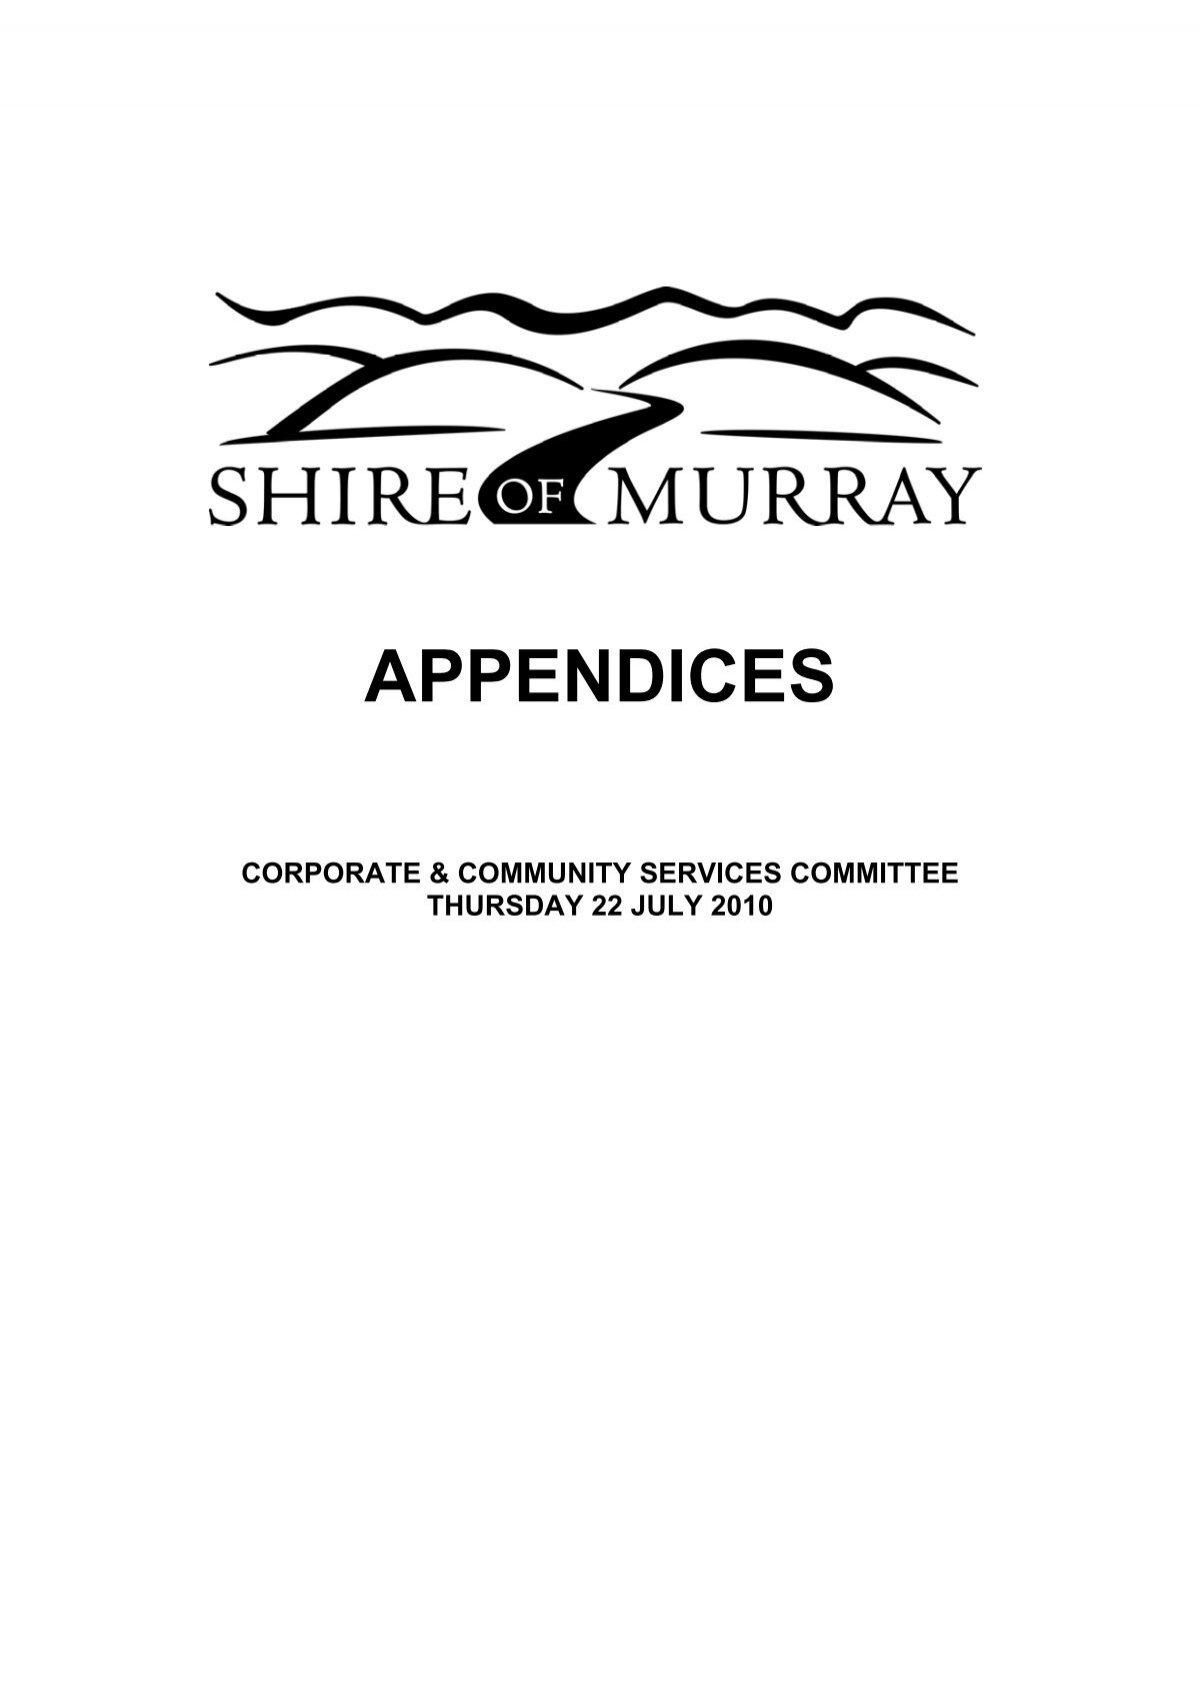 APPENDICES - the Shire of Murray